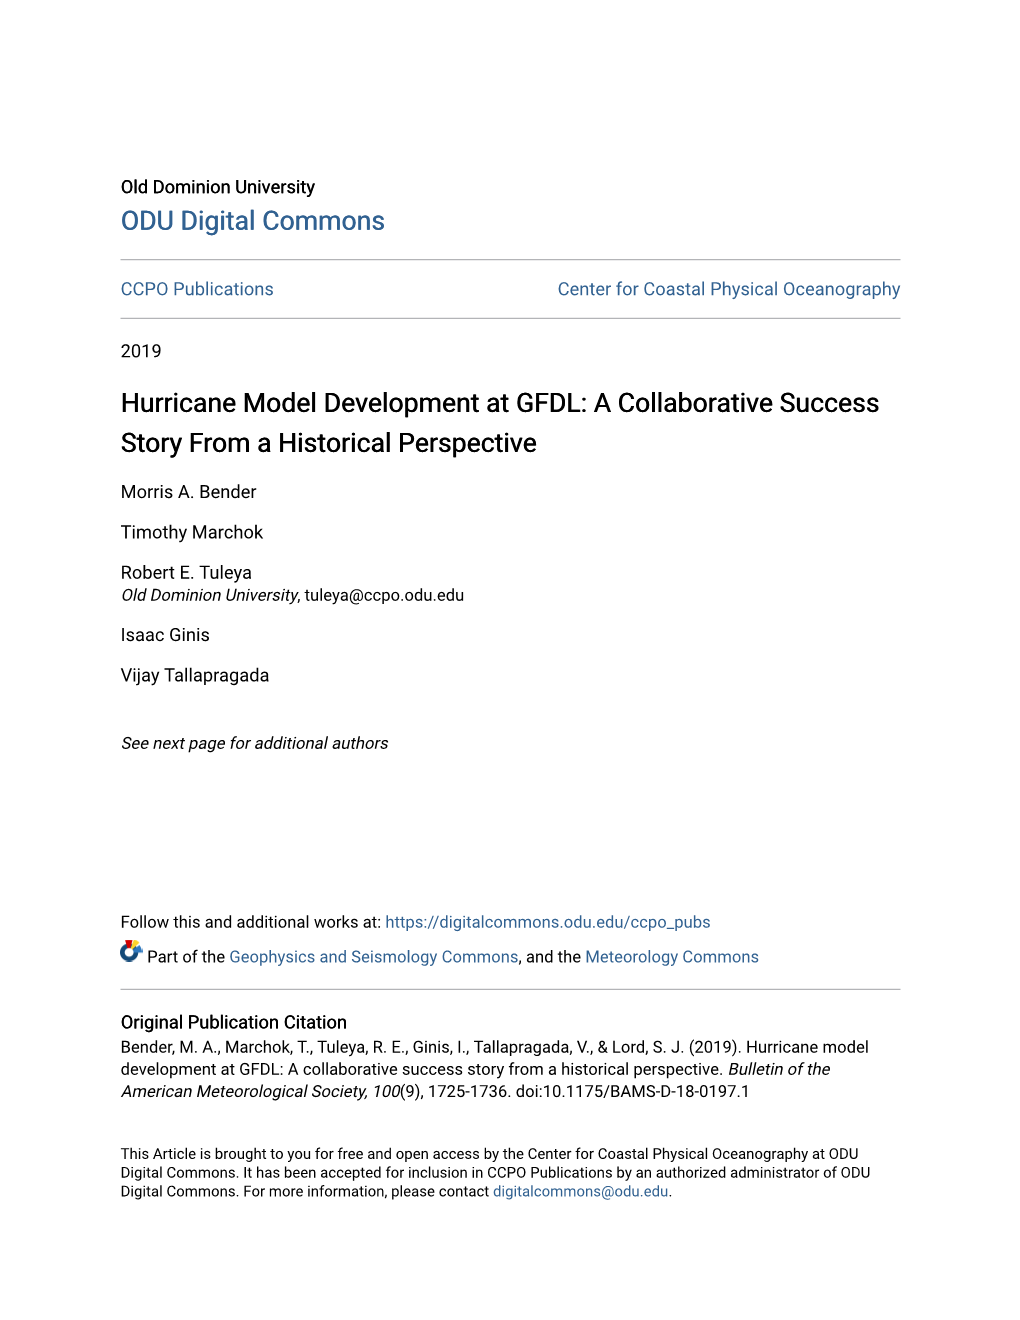 Hurricane Model Development at GFDL: a Collaborative Success Story from a Historical Perspective